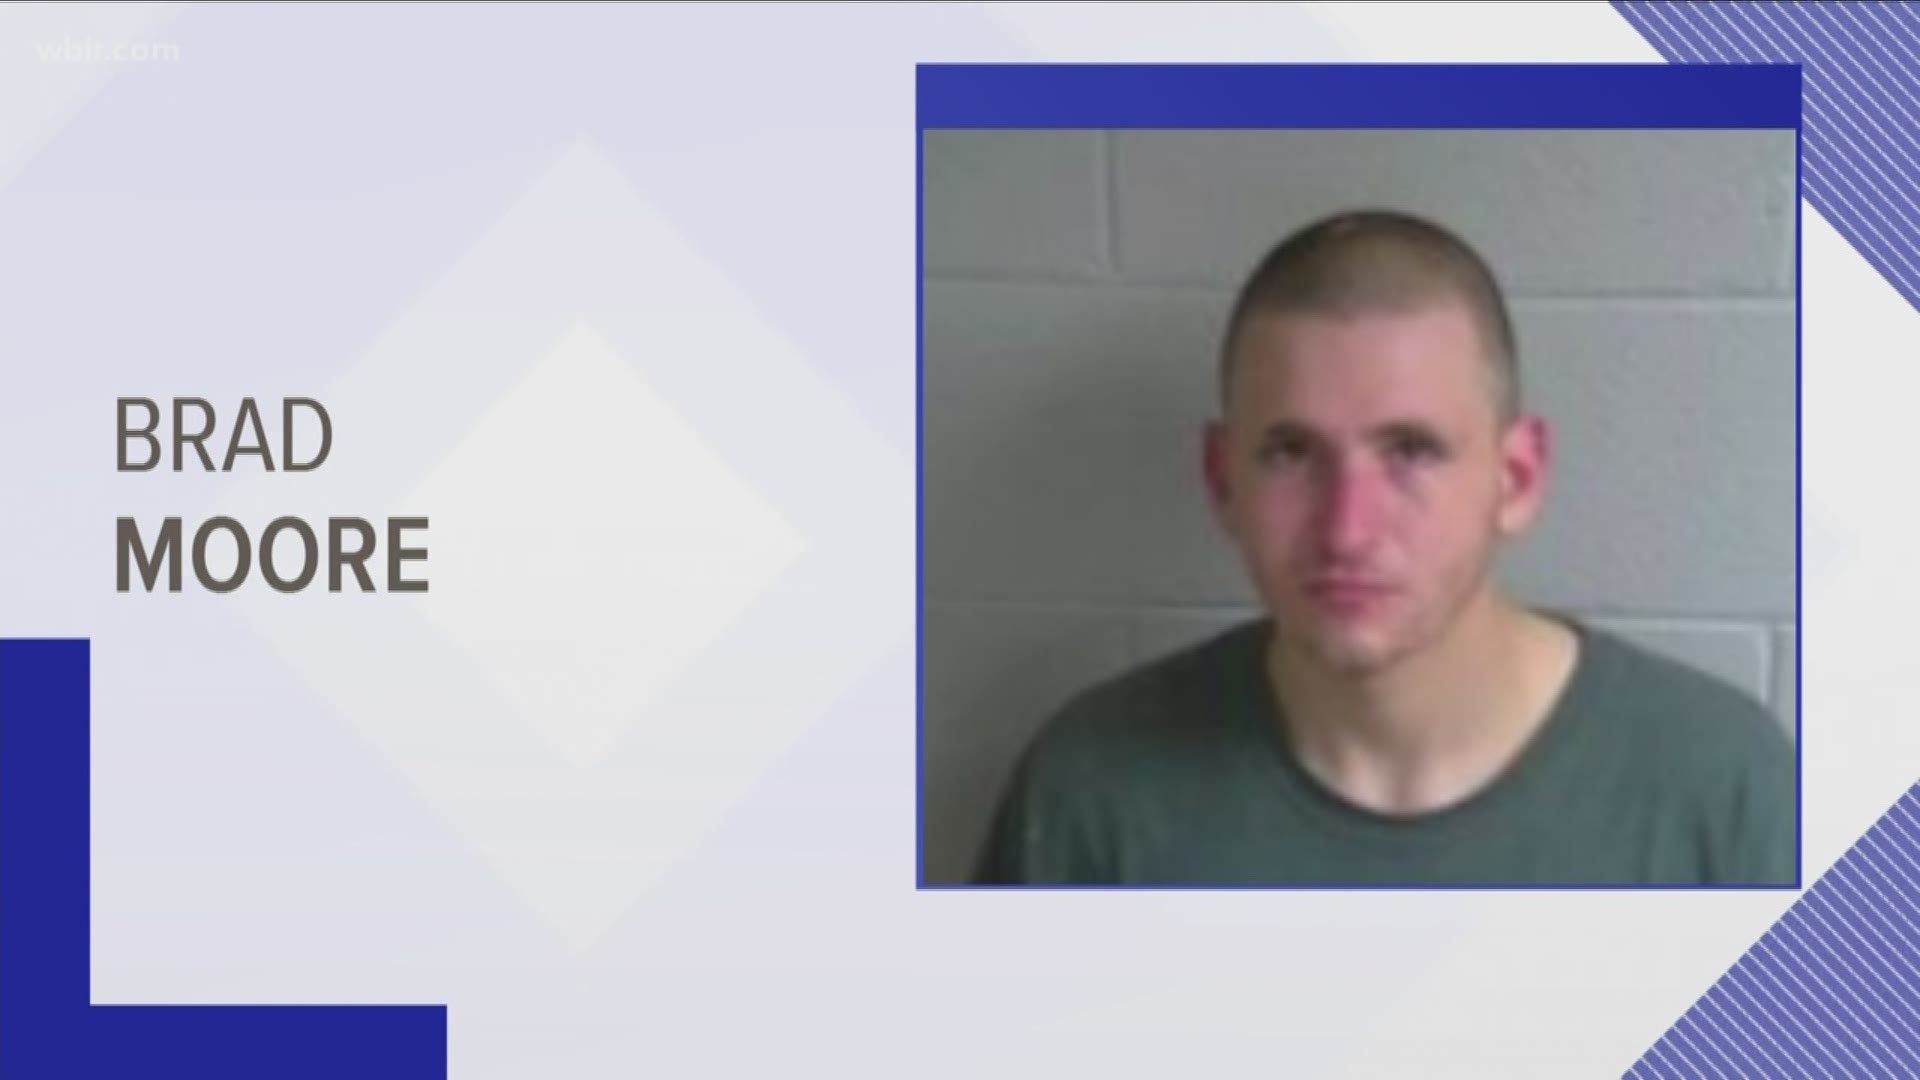 Investigators said Brad Allen James Moore, 24, was wanted for attempted first-degree murder.